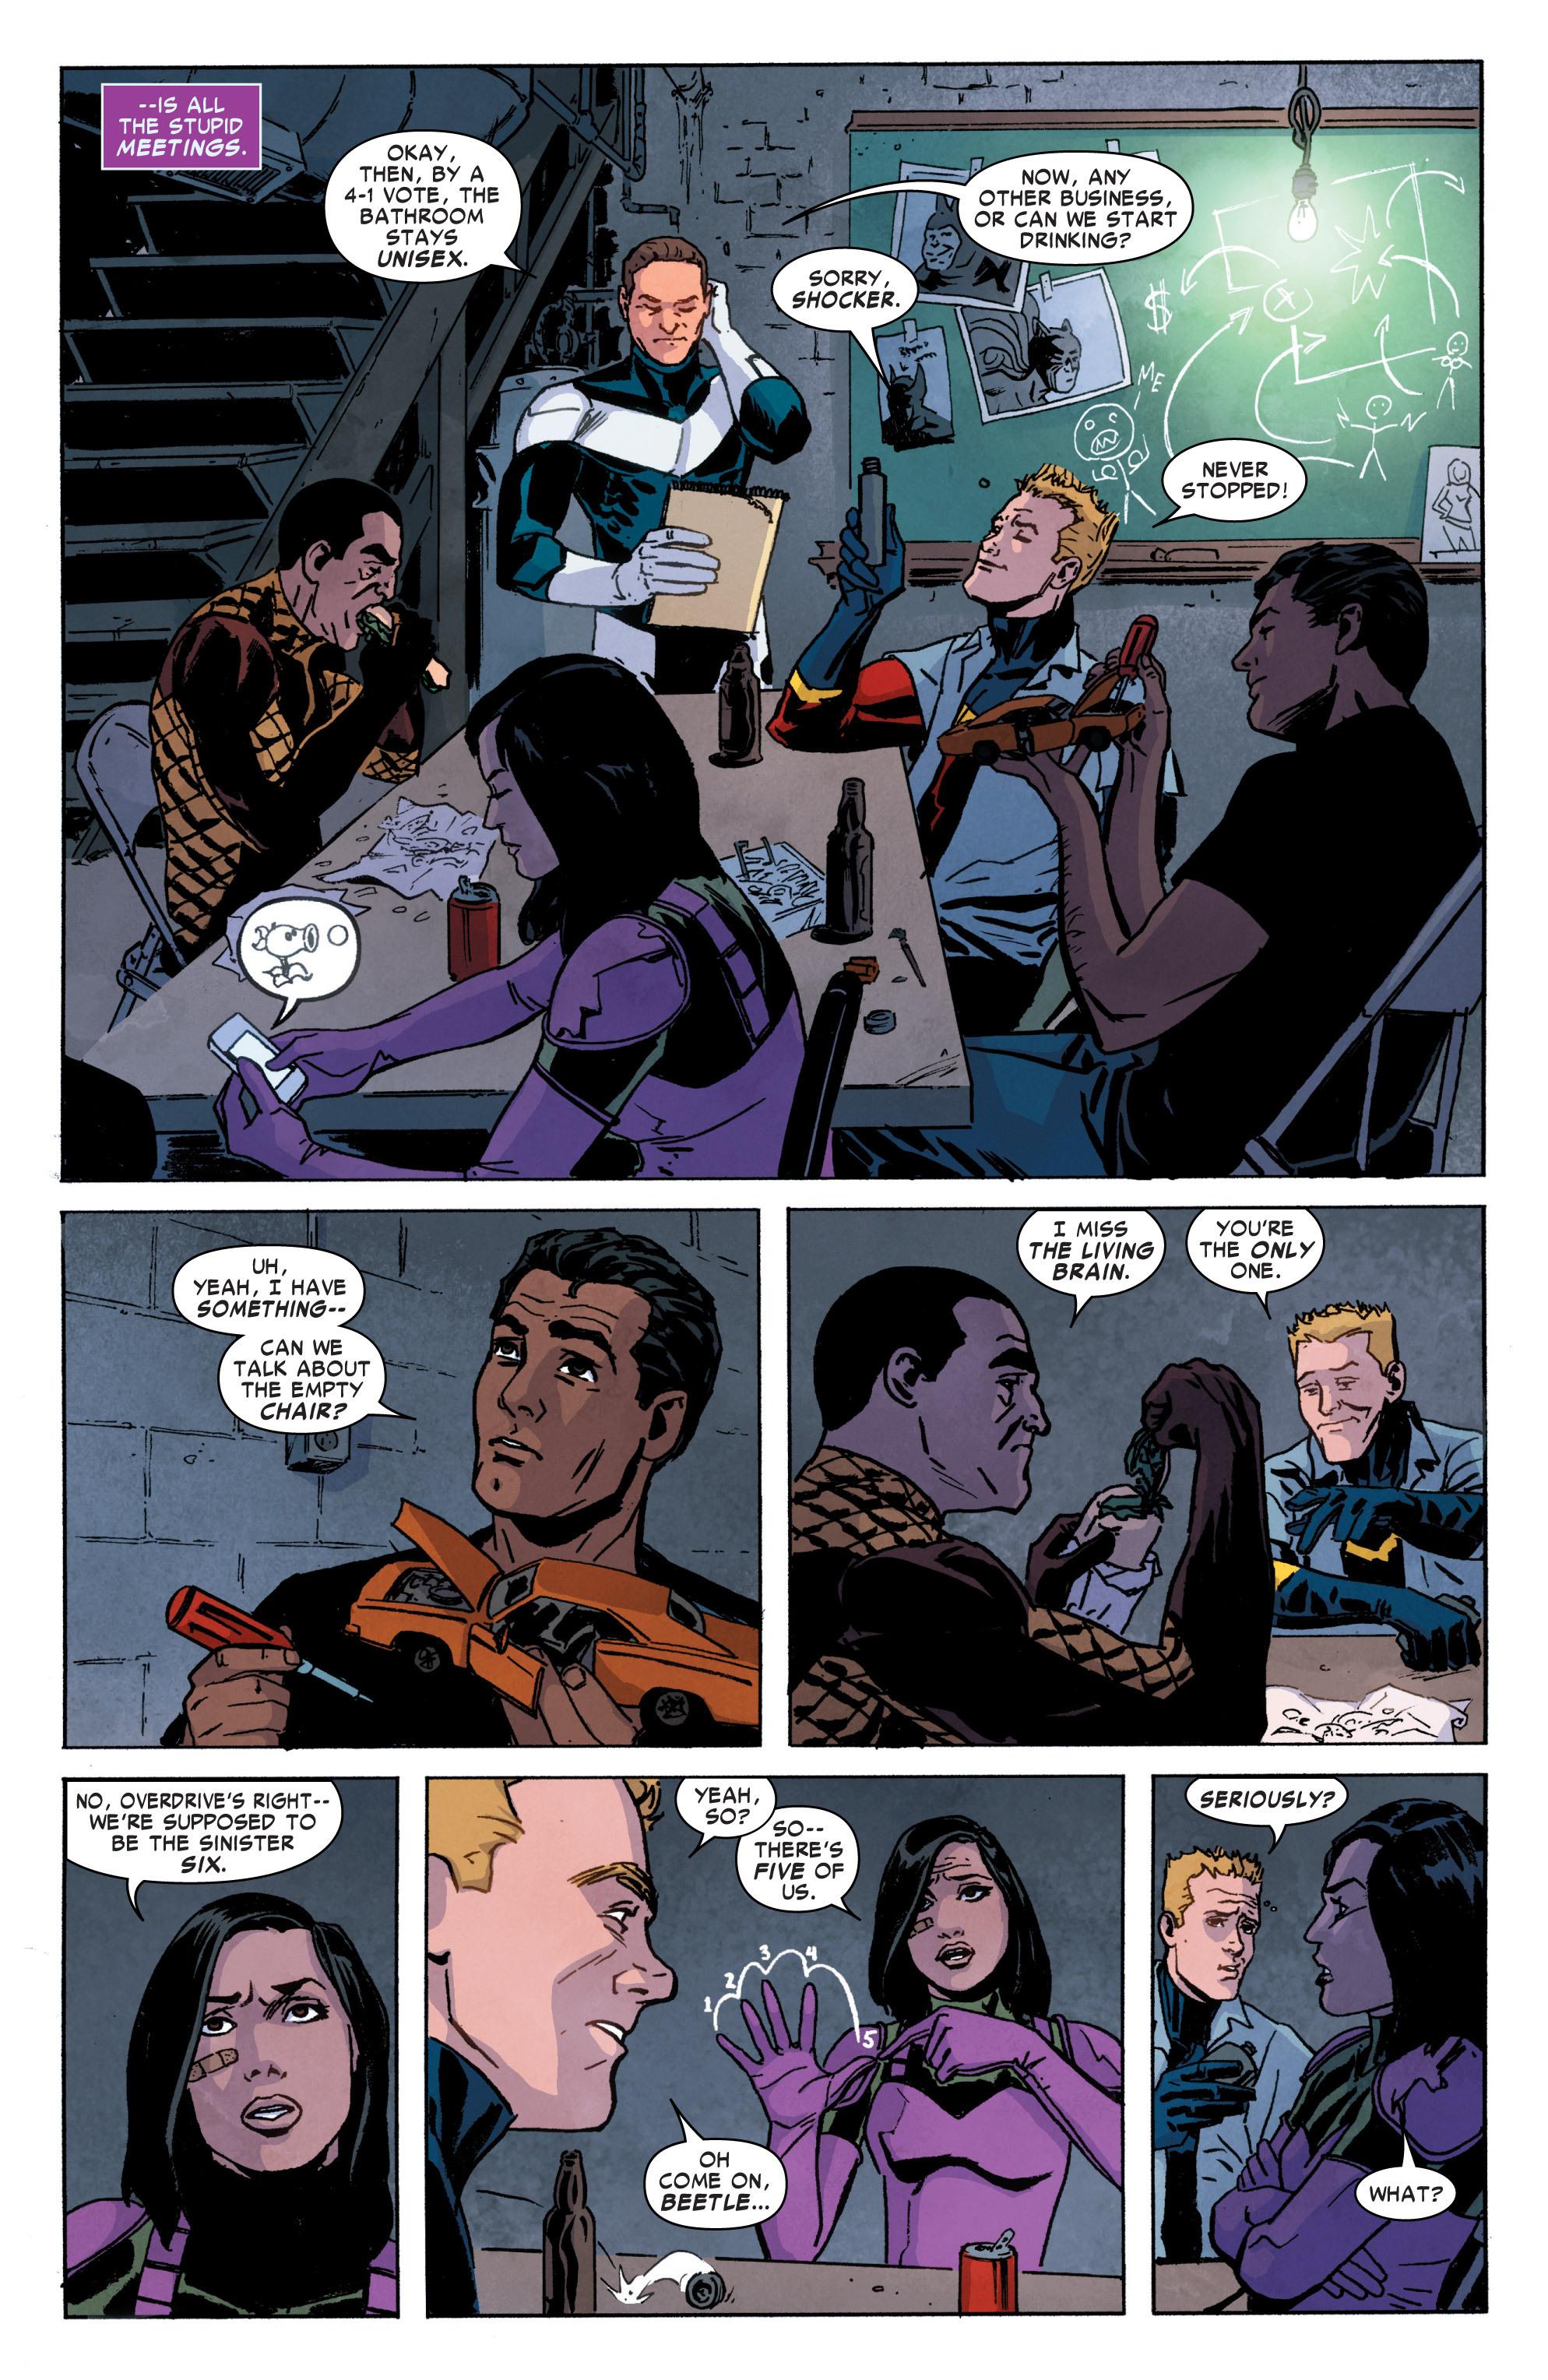 The Superior Foes of Spider-Man - Getting The Band Back Together review